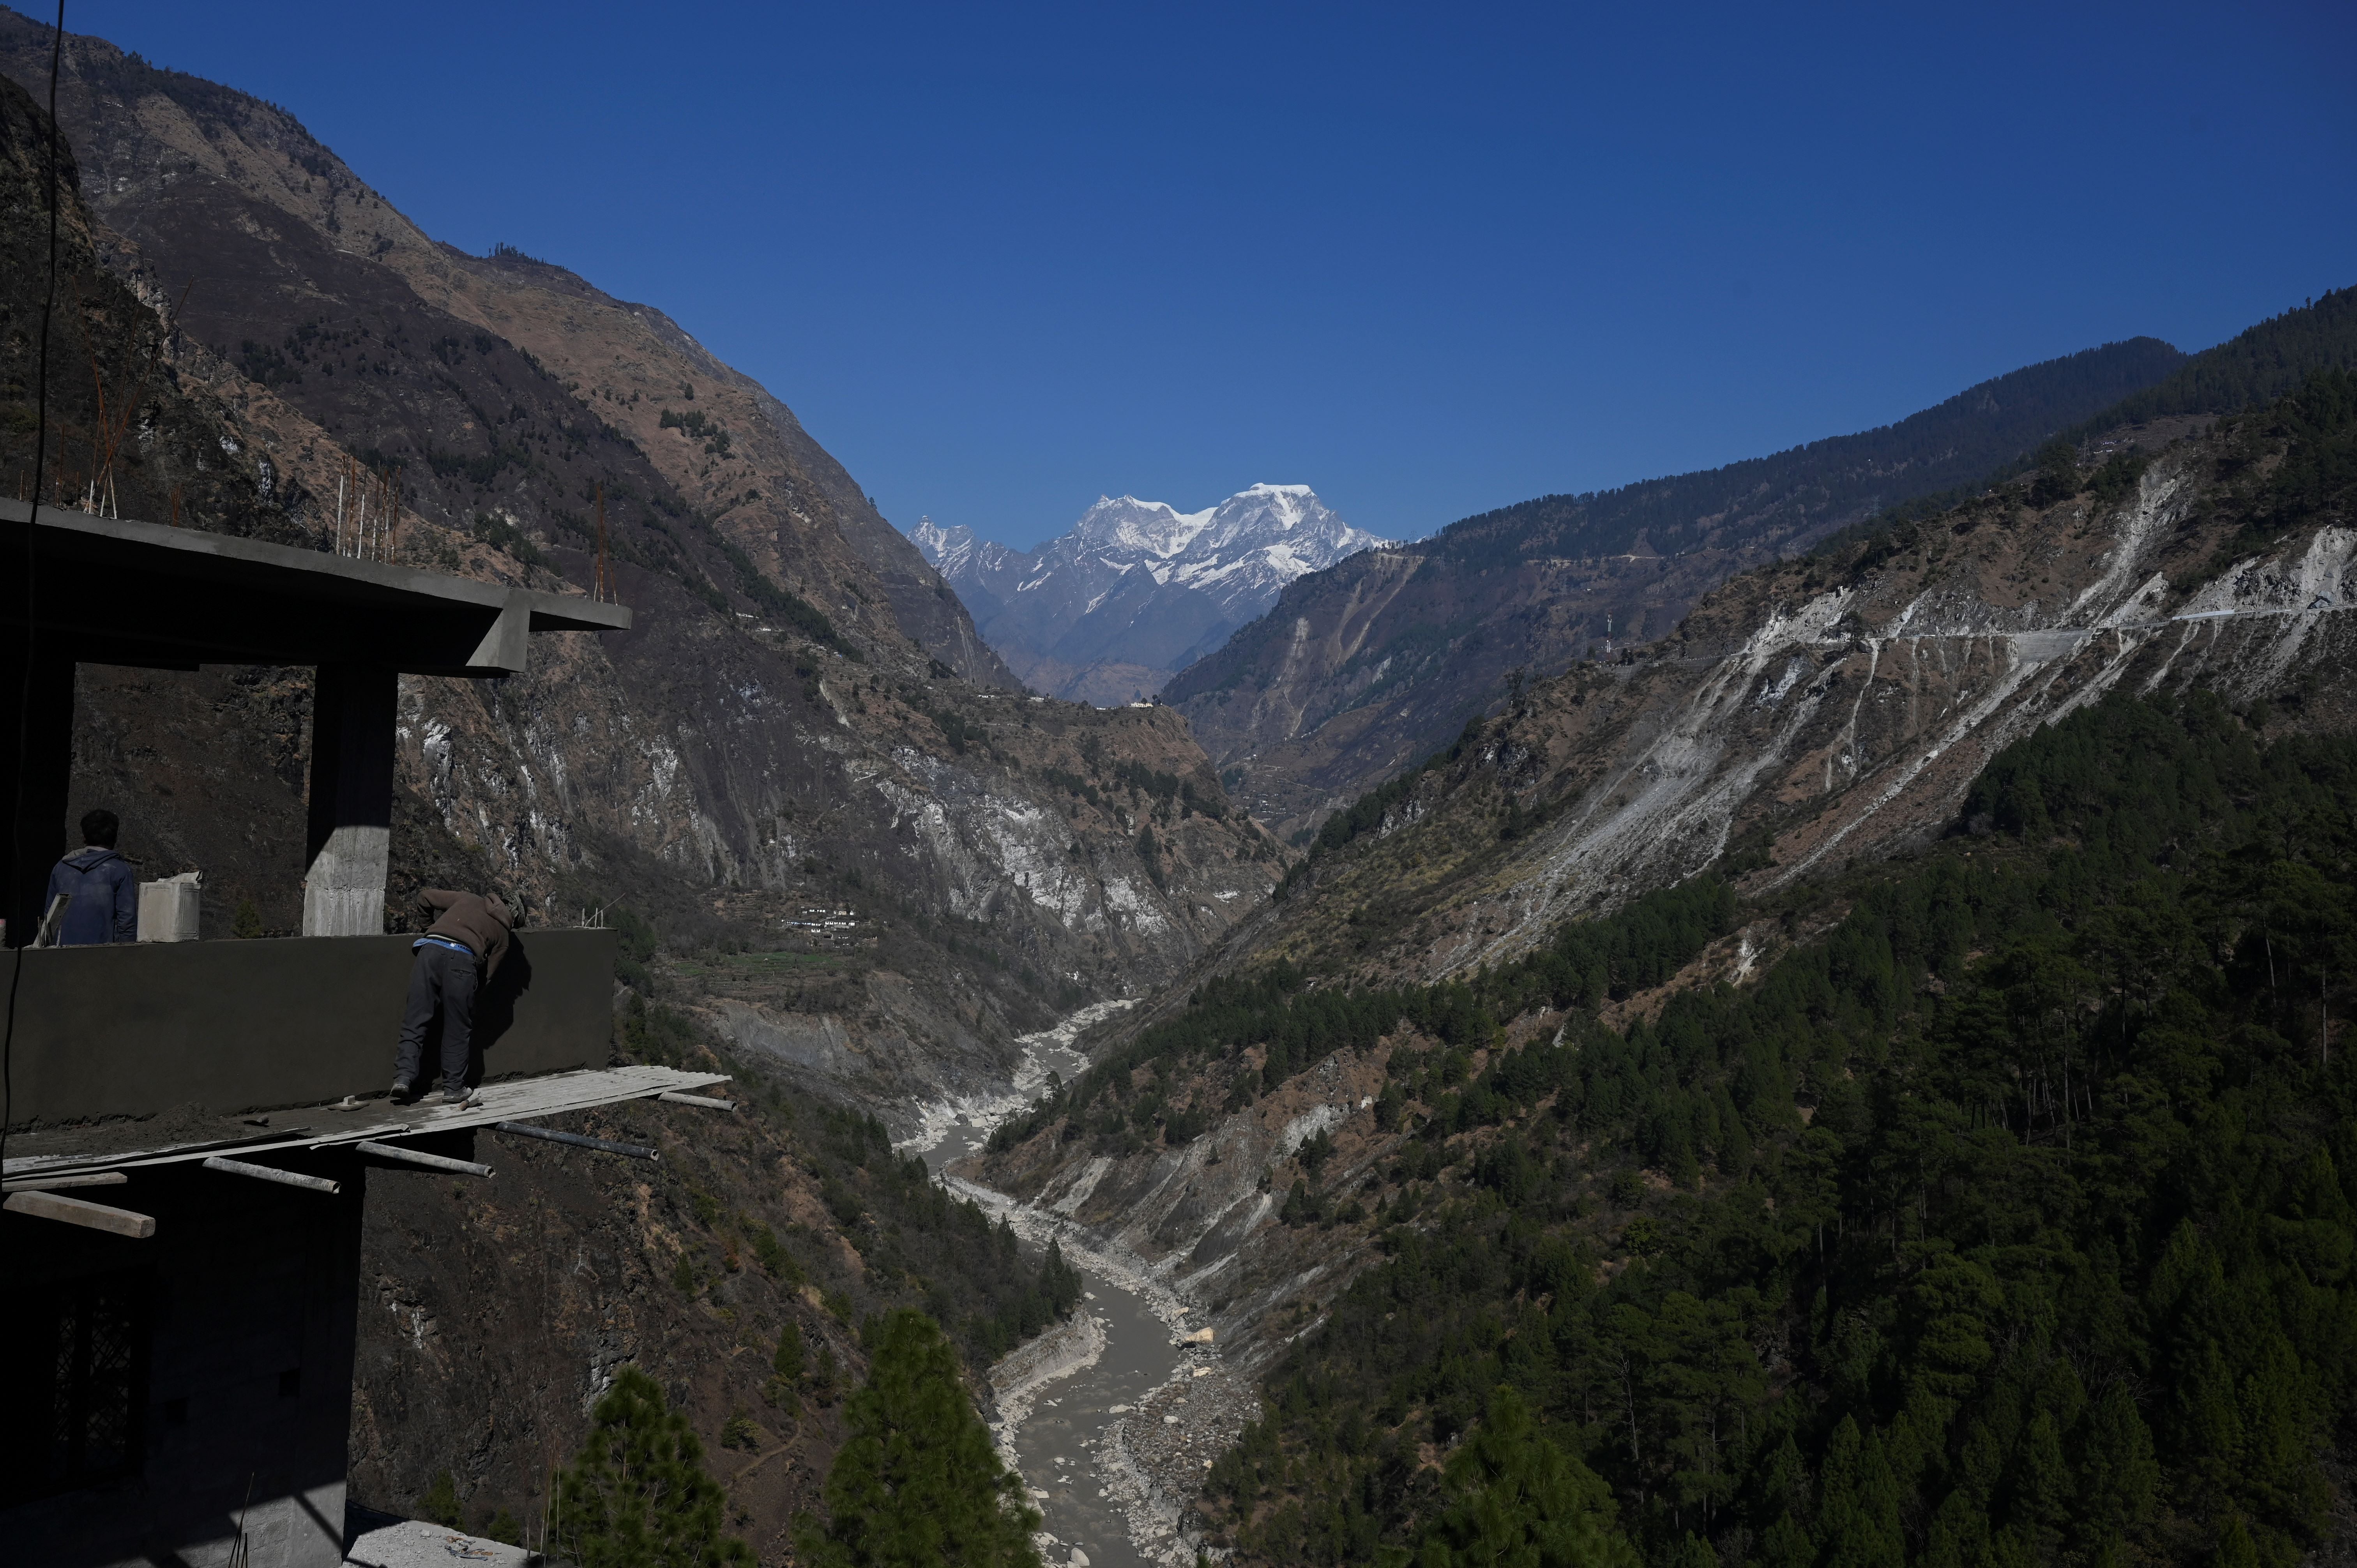 A mason works at an under-construction building site on the edge of the mountain valley in Chamoli district of Uttarakhand